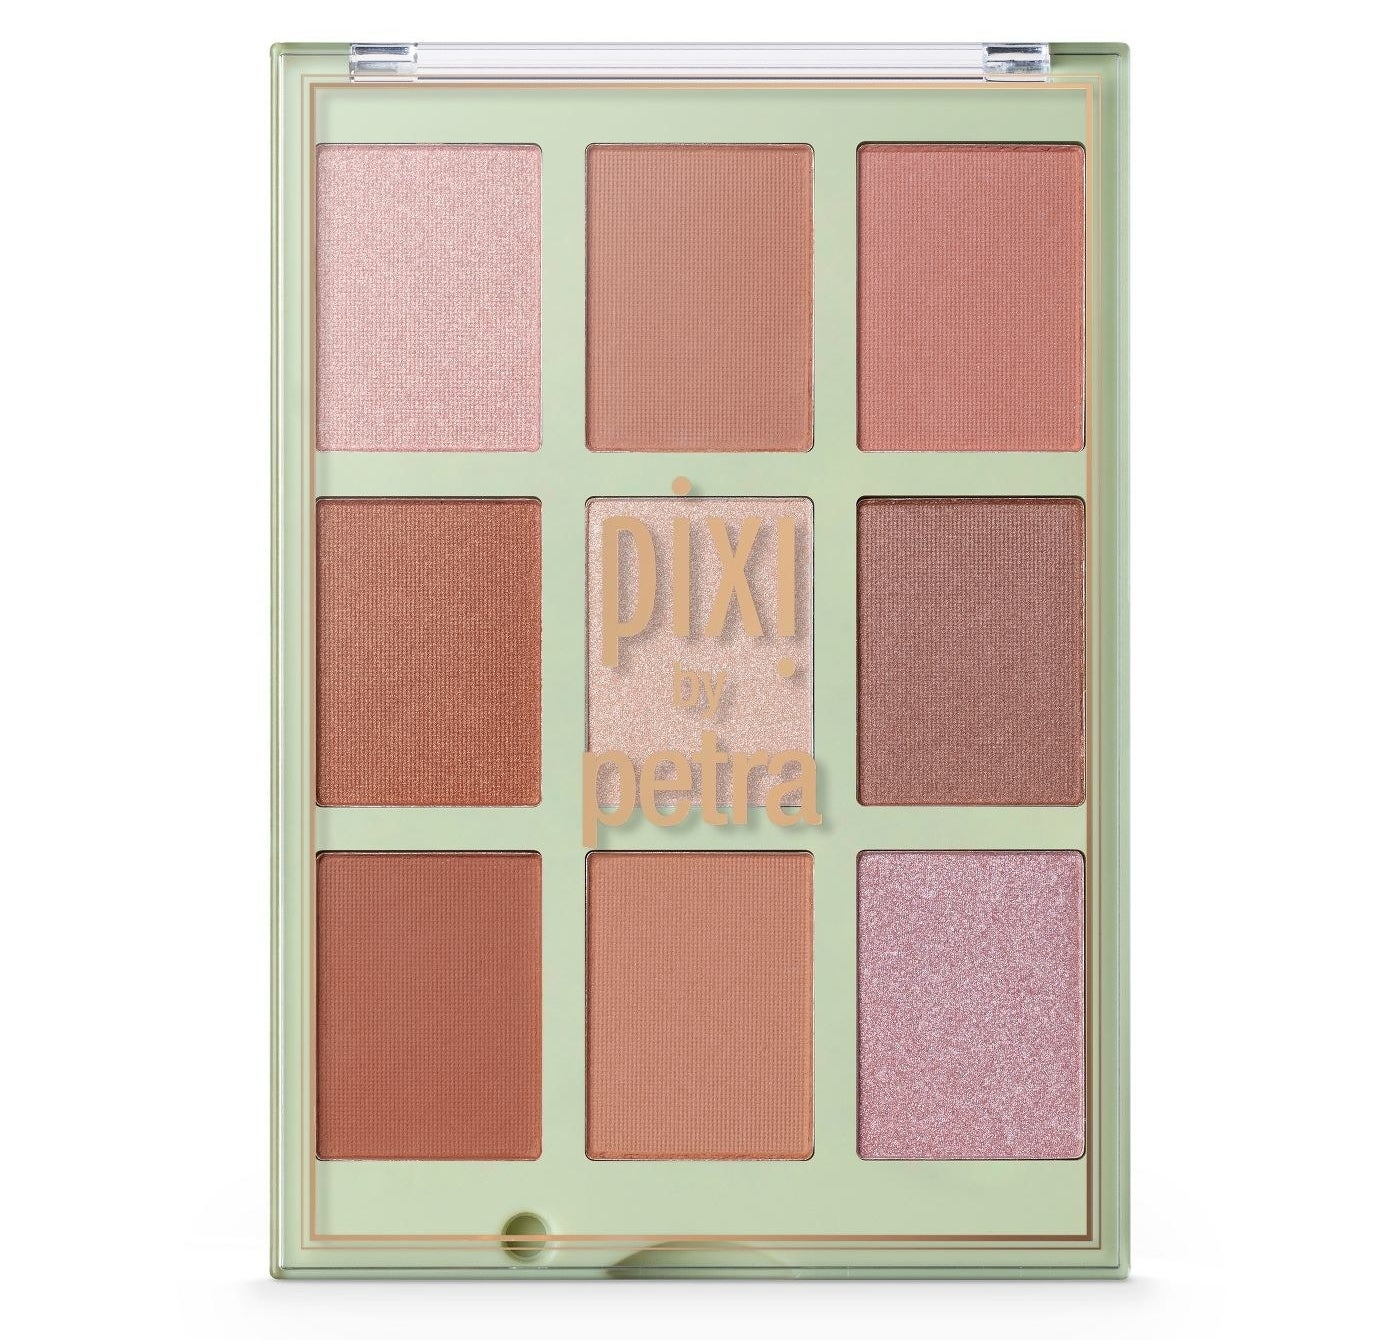 A multi-colored makeup palette in pinkish hues